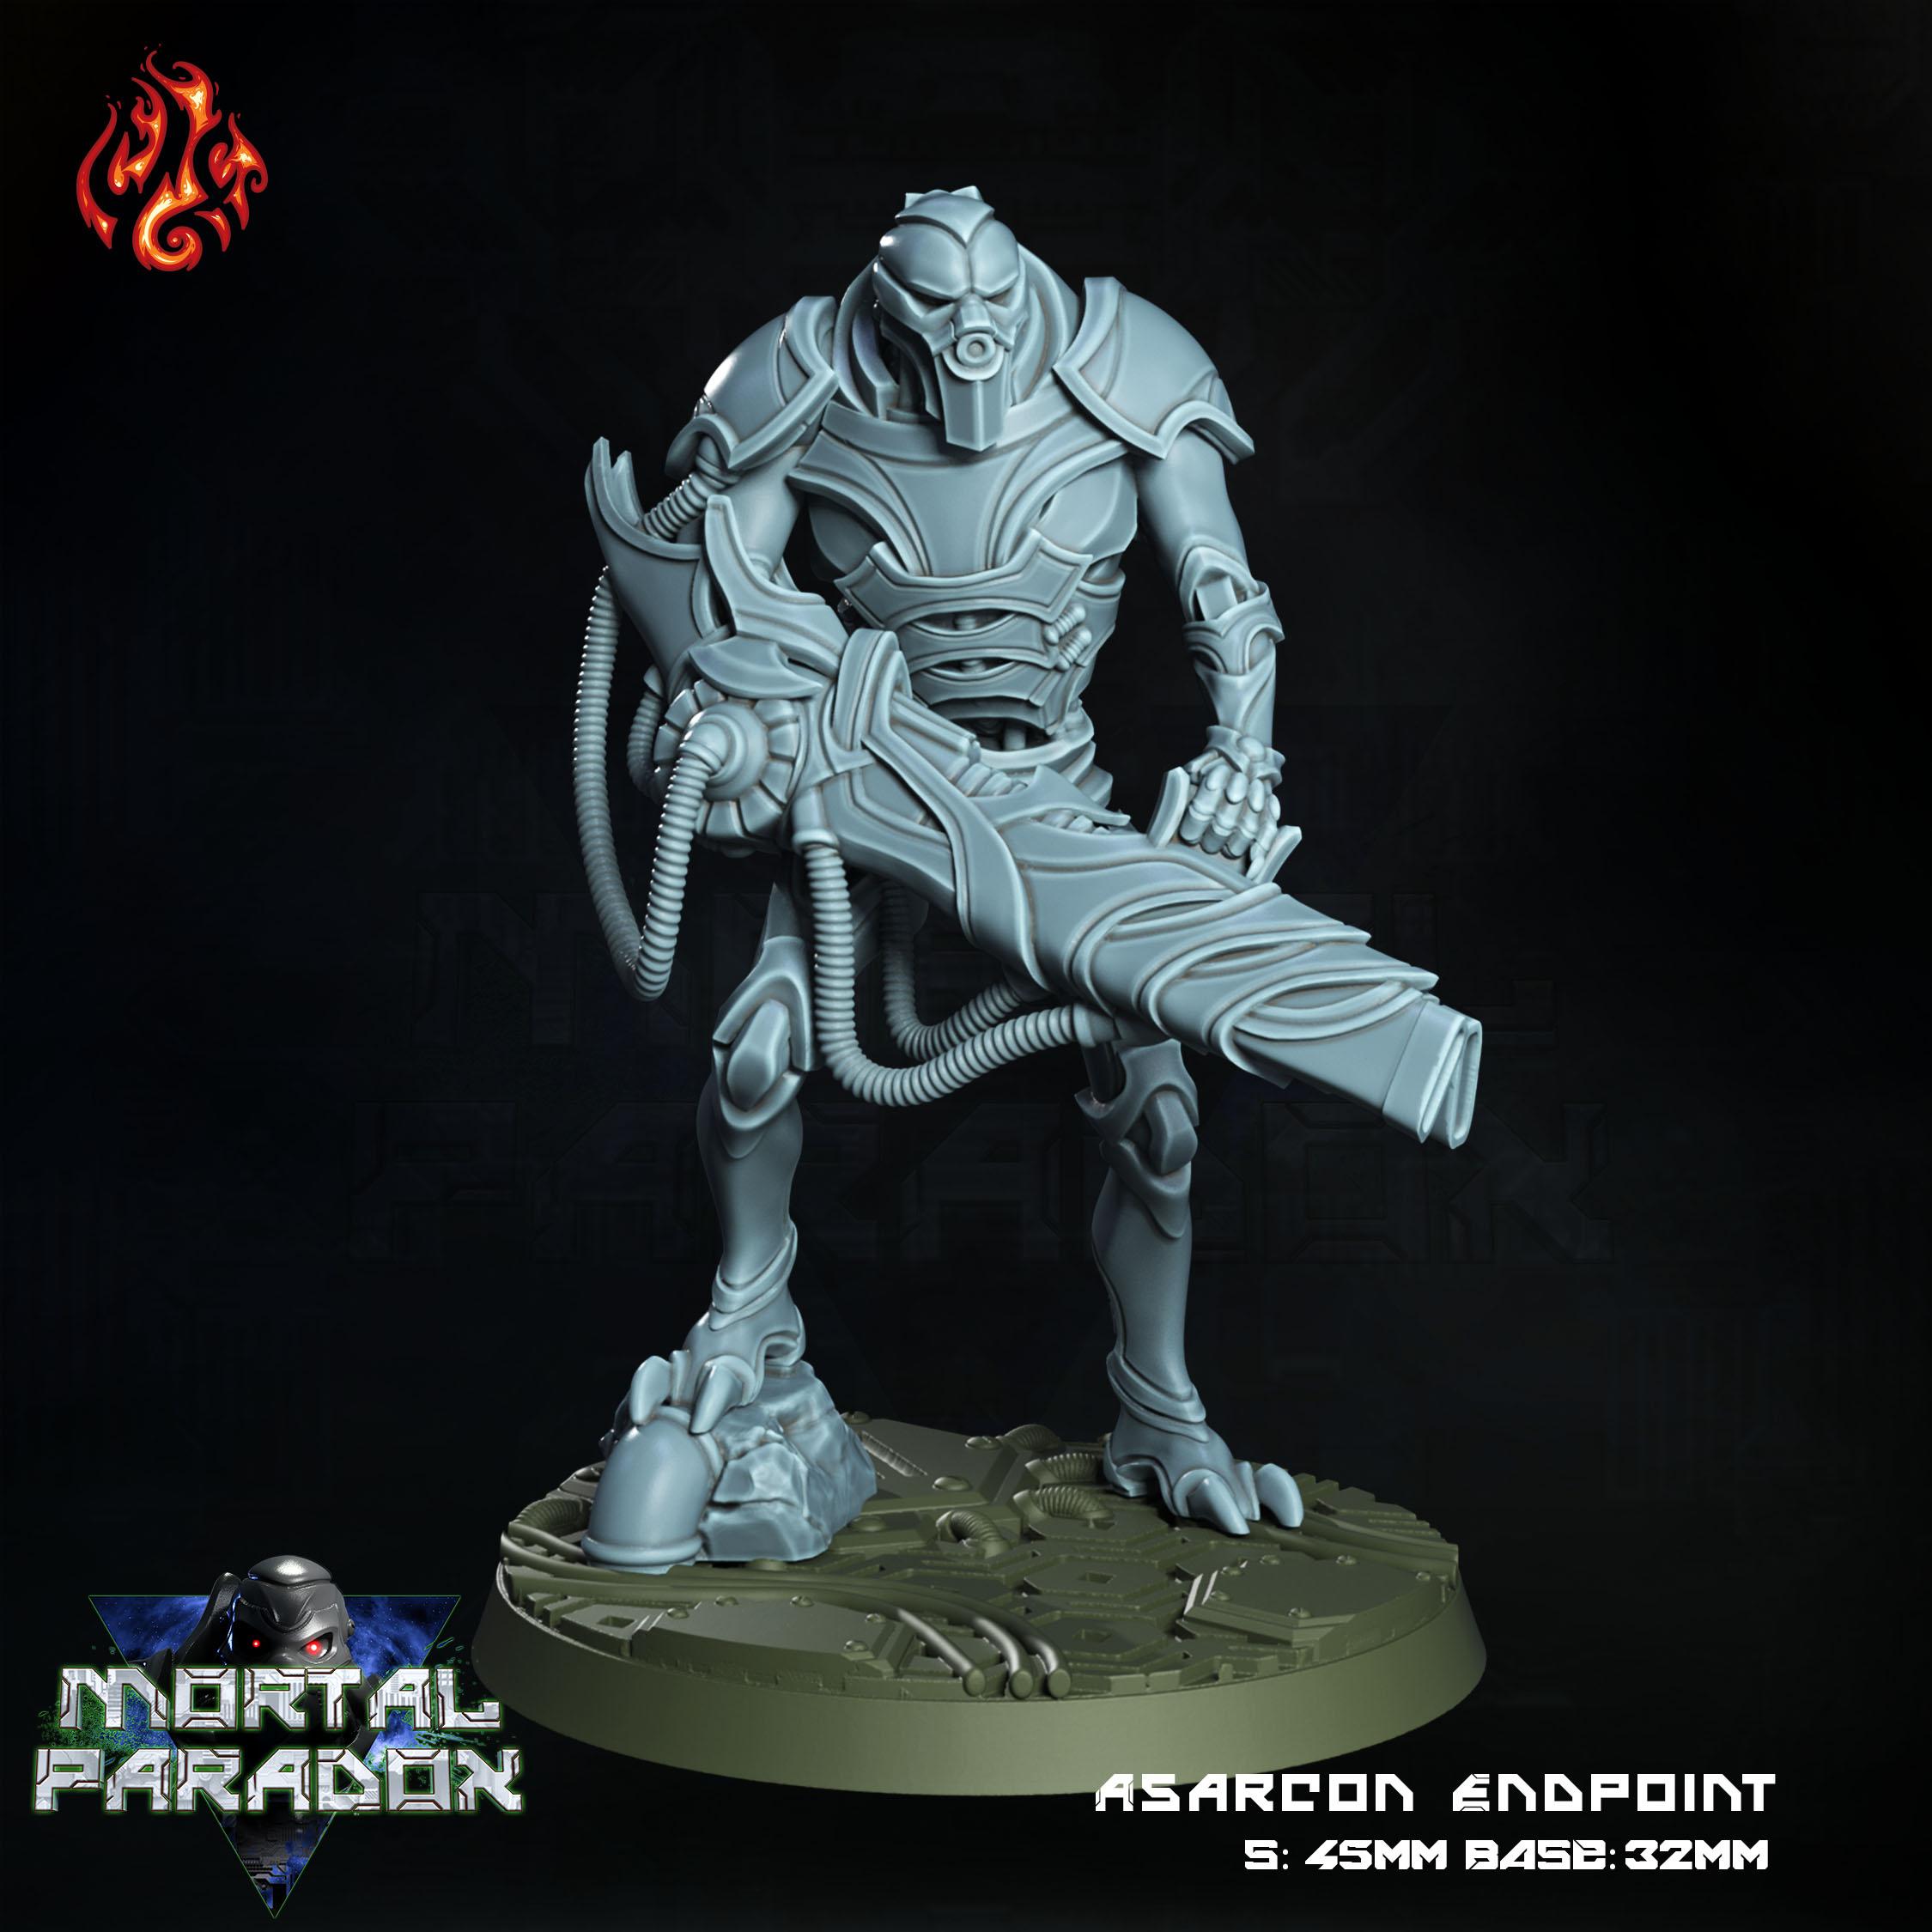 Asarcon Endpoint 3d model